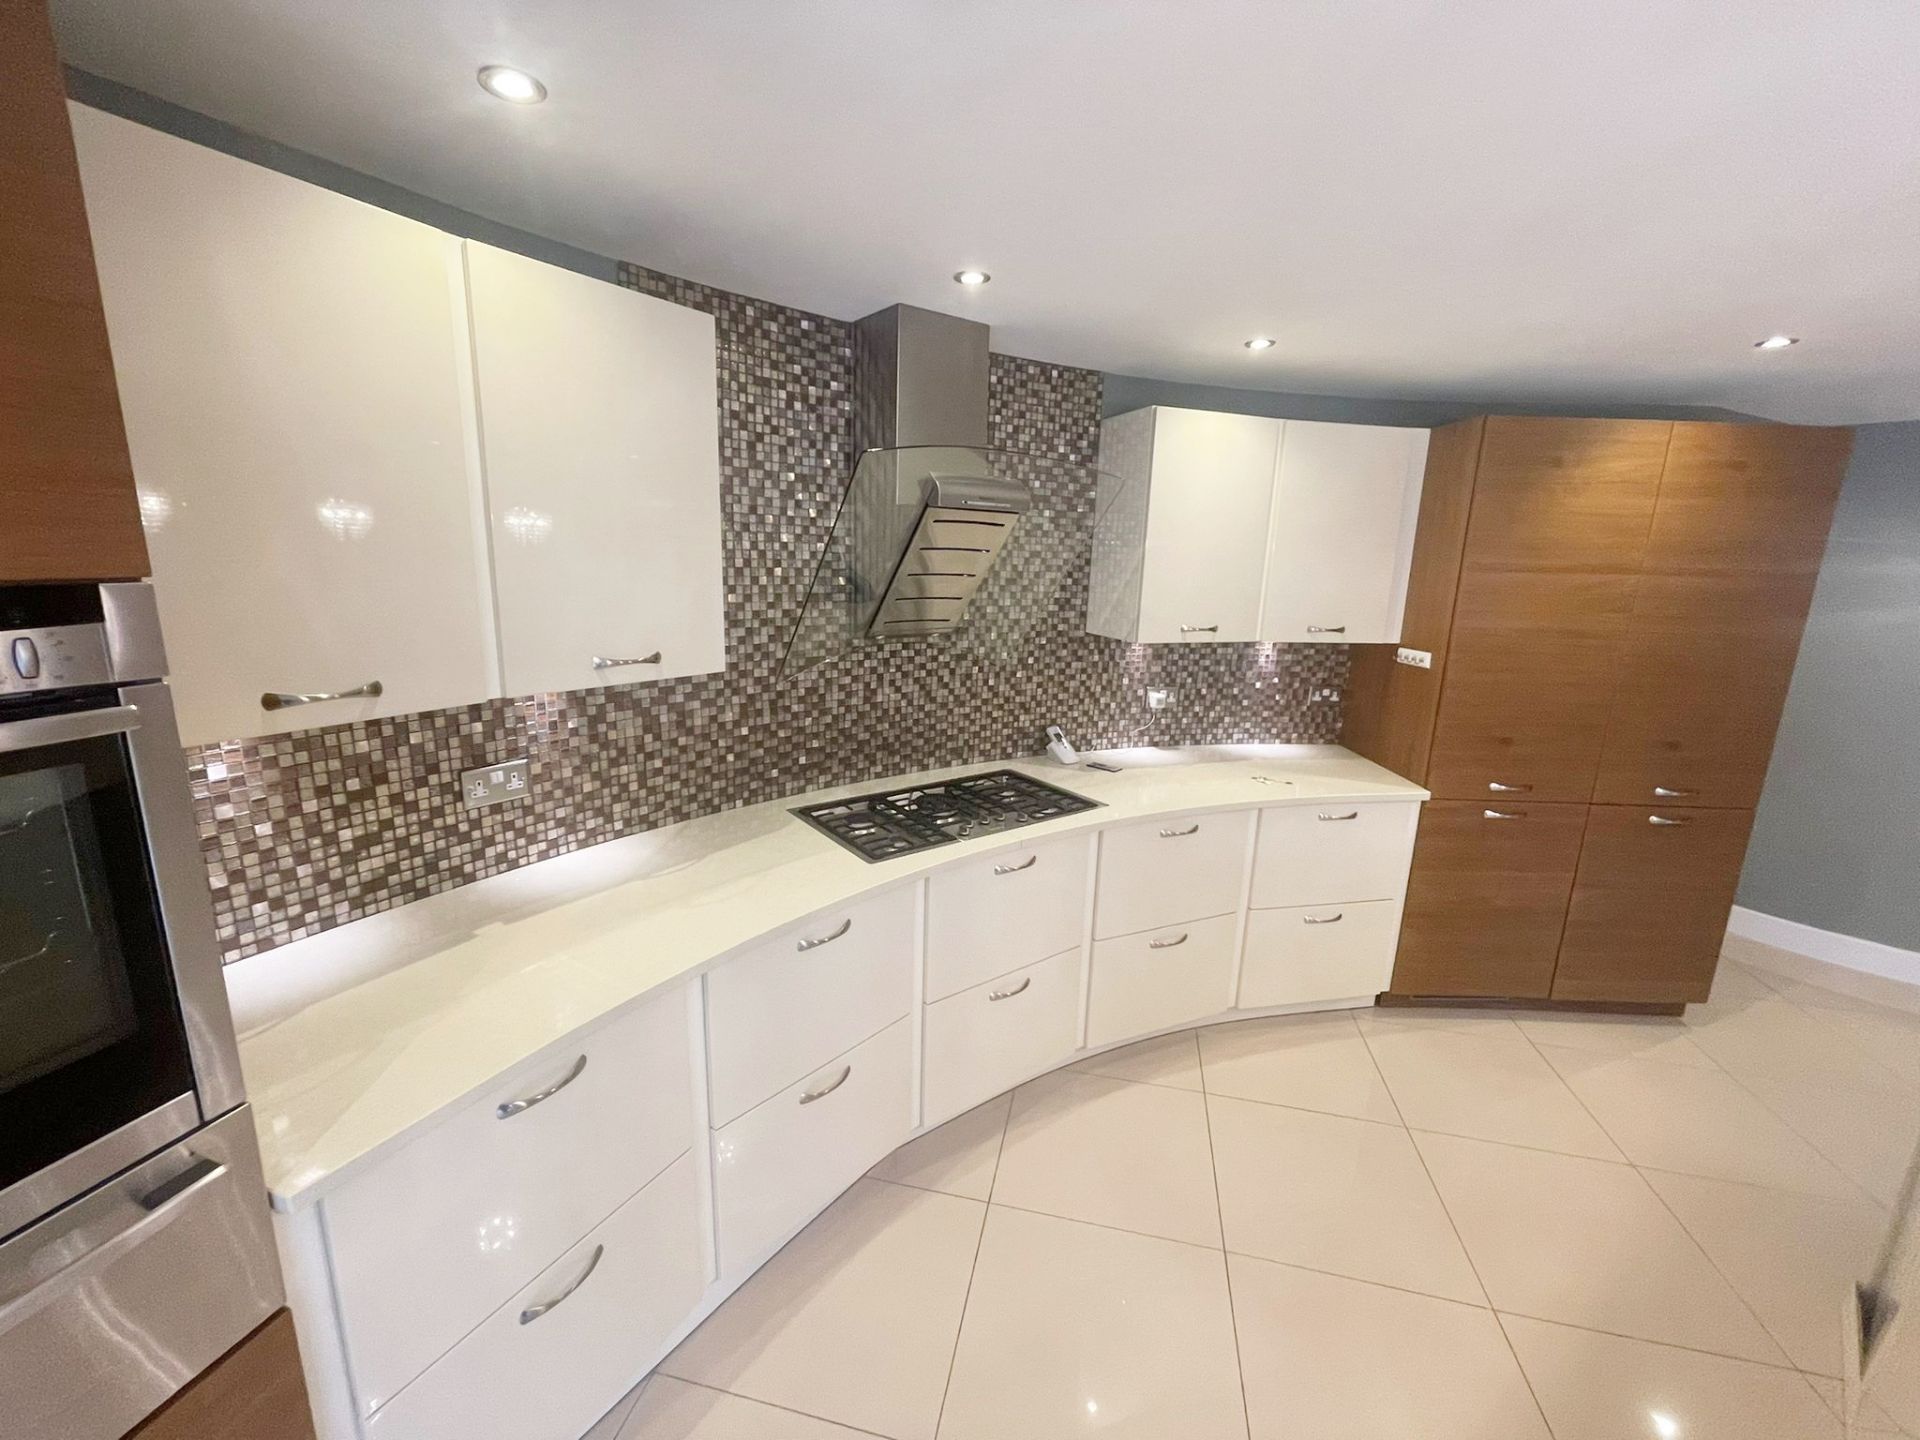 1 x Contemporary ALNO Fitted Kitchen With Branded  Appliances Created By Award Winning Kitchen - Image 49 of 89